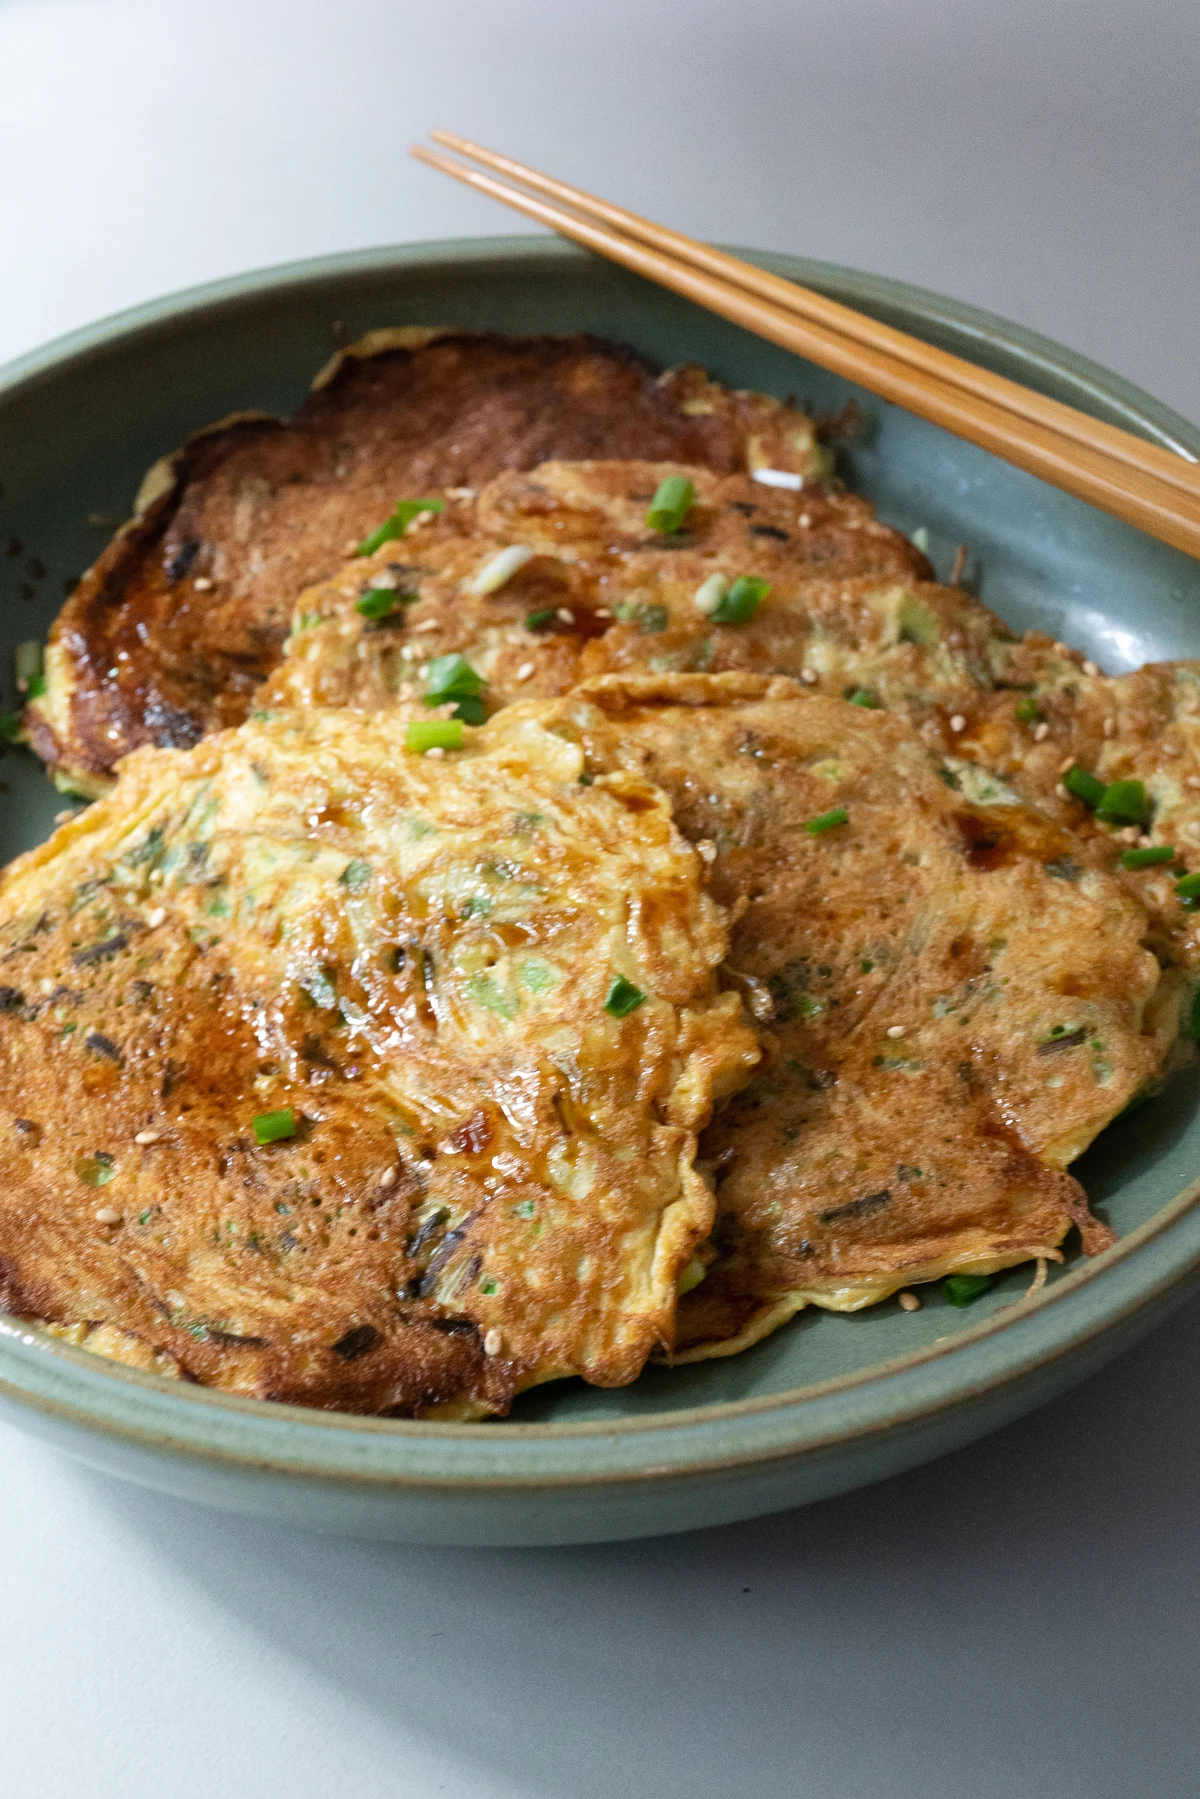 Prepared Chive Vermicelli Egg Pancakes served in a shallow dish.